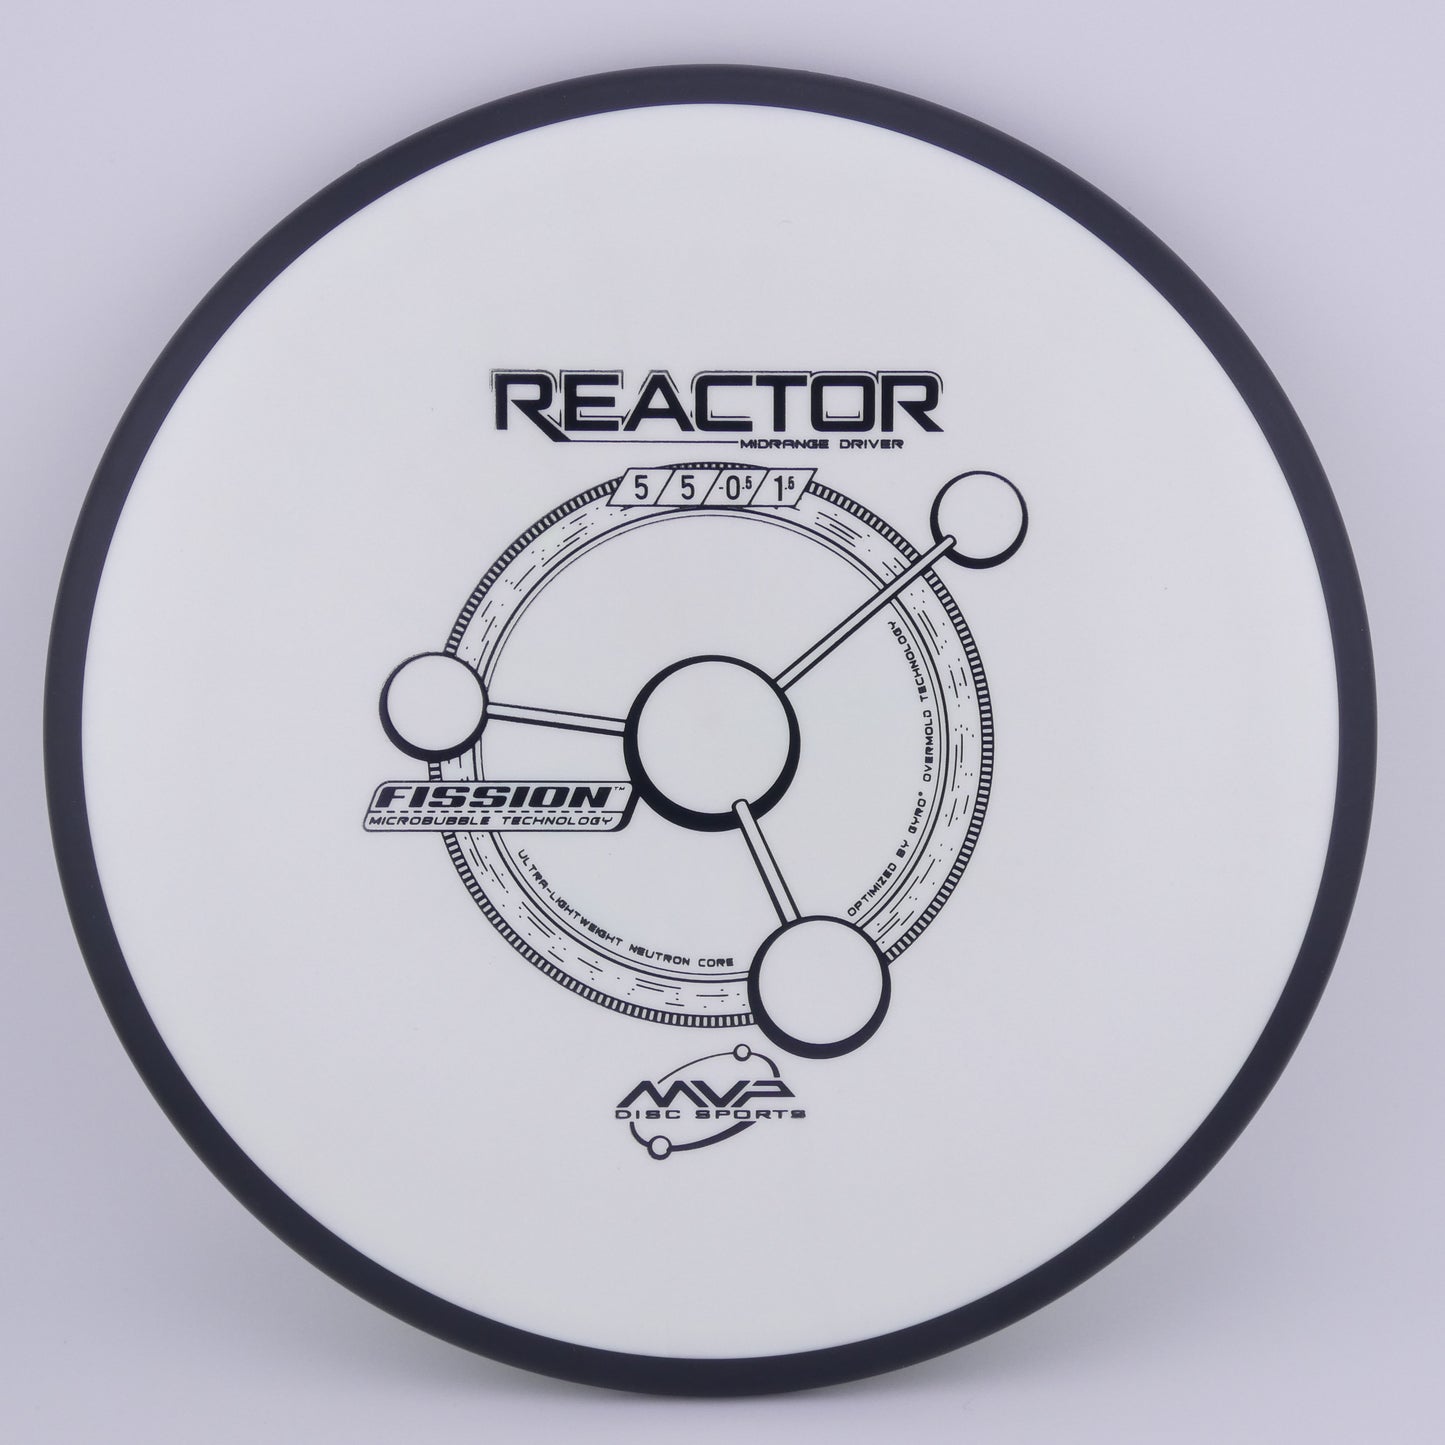 Fission Reactor 160-164g